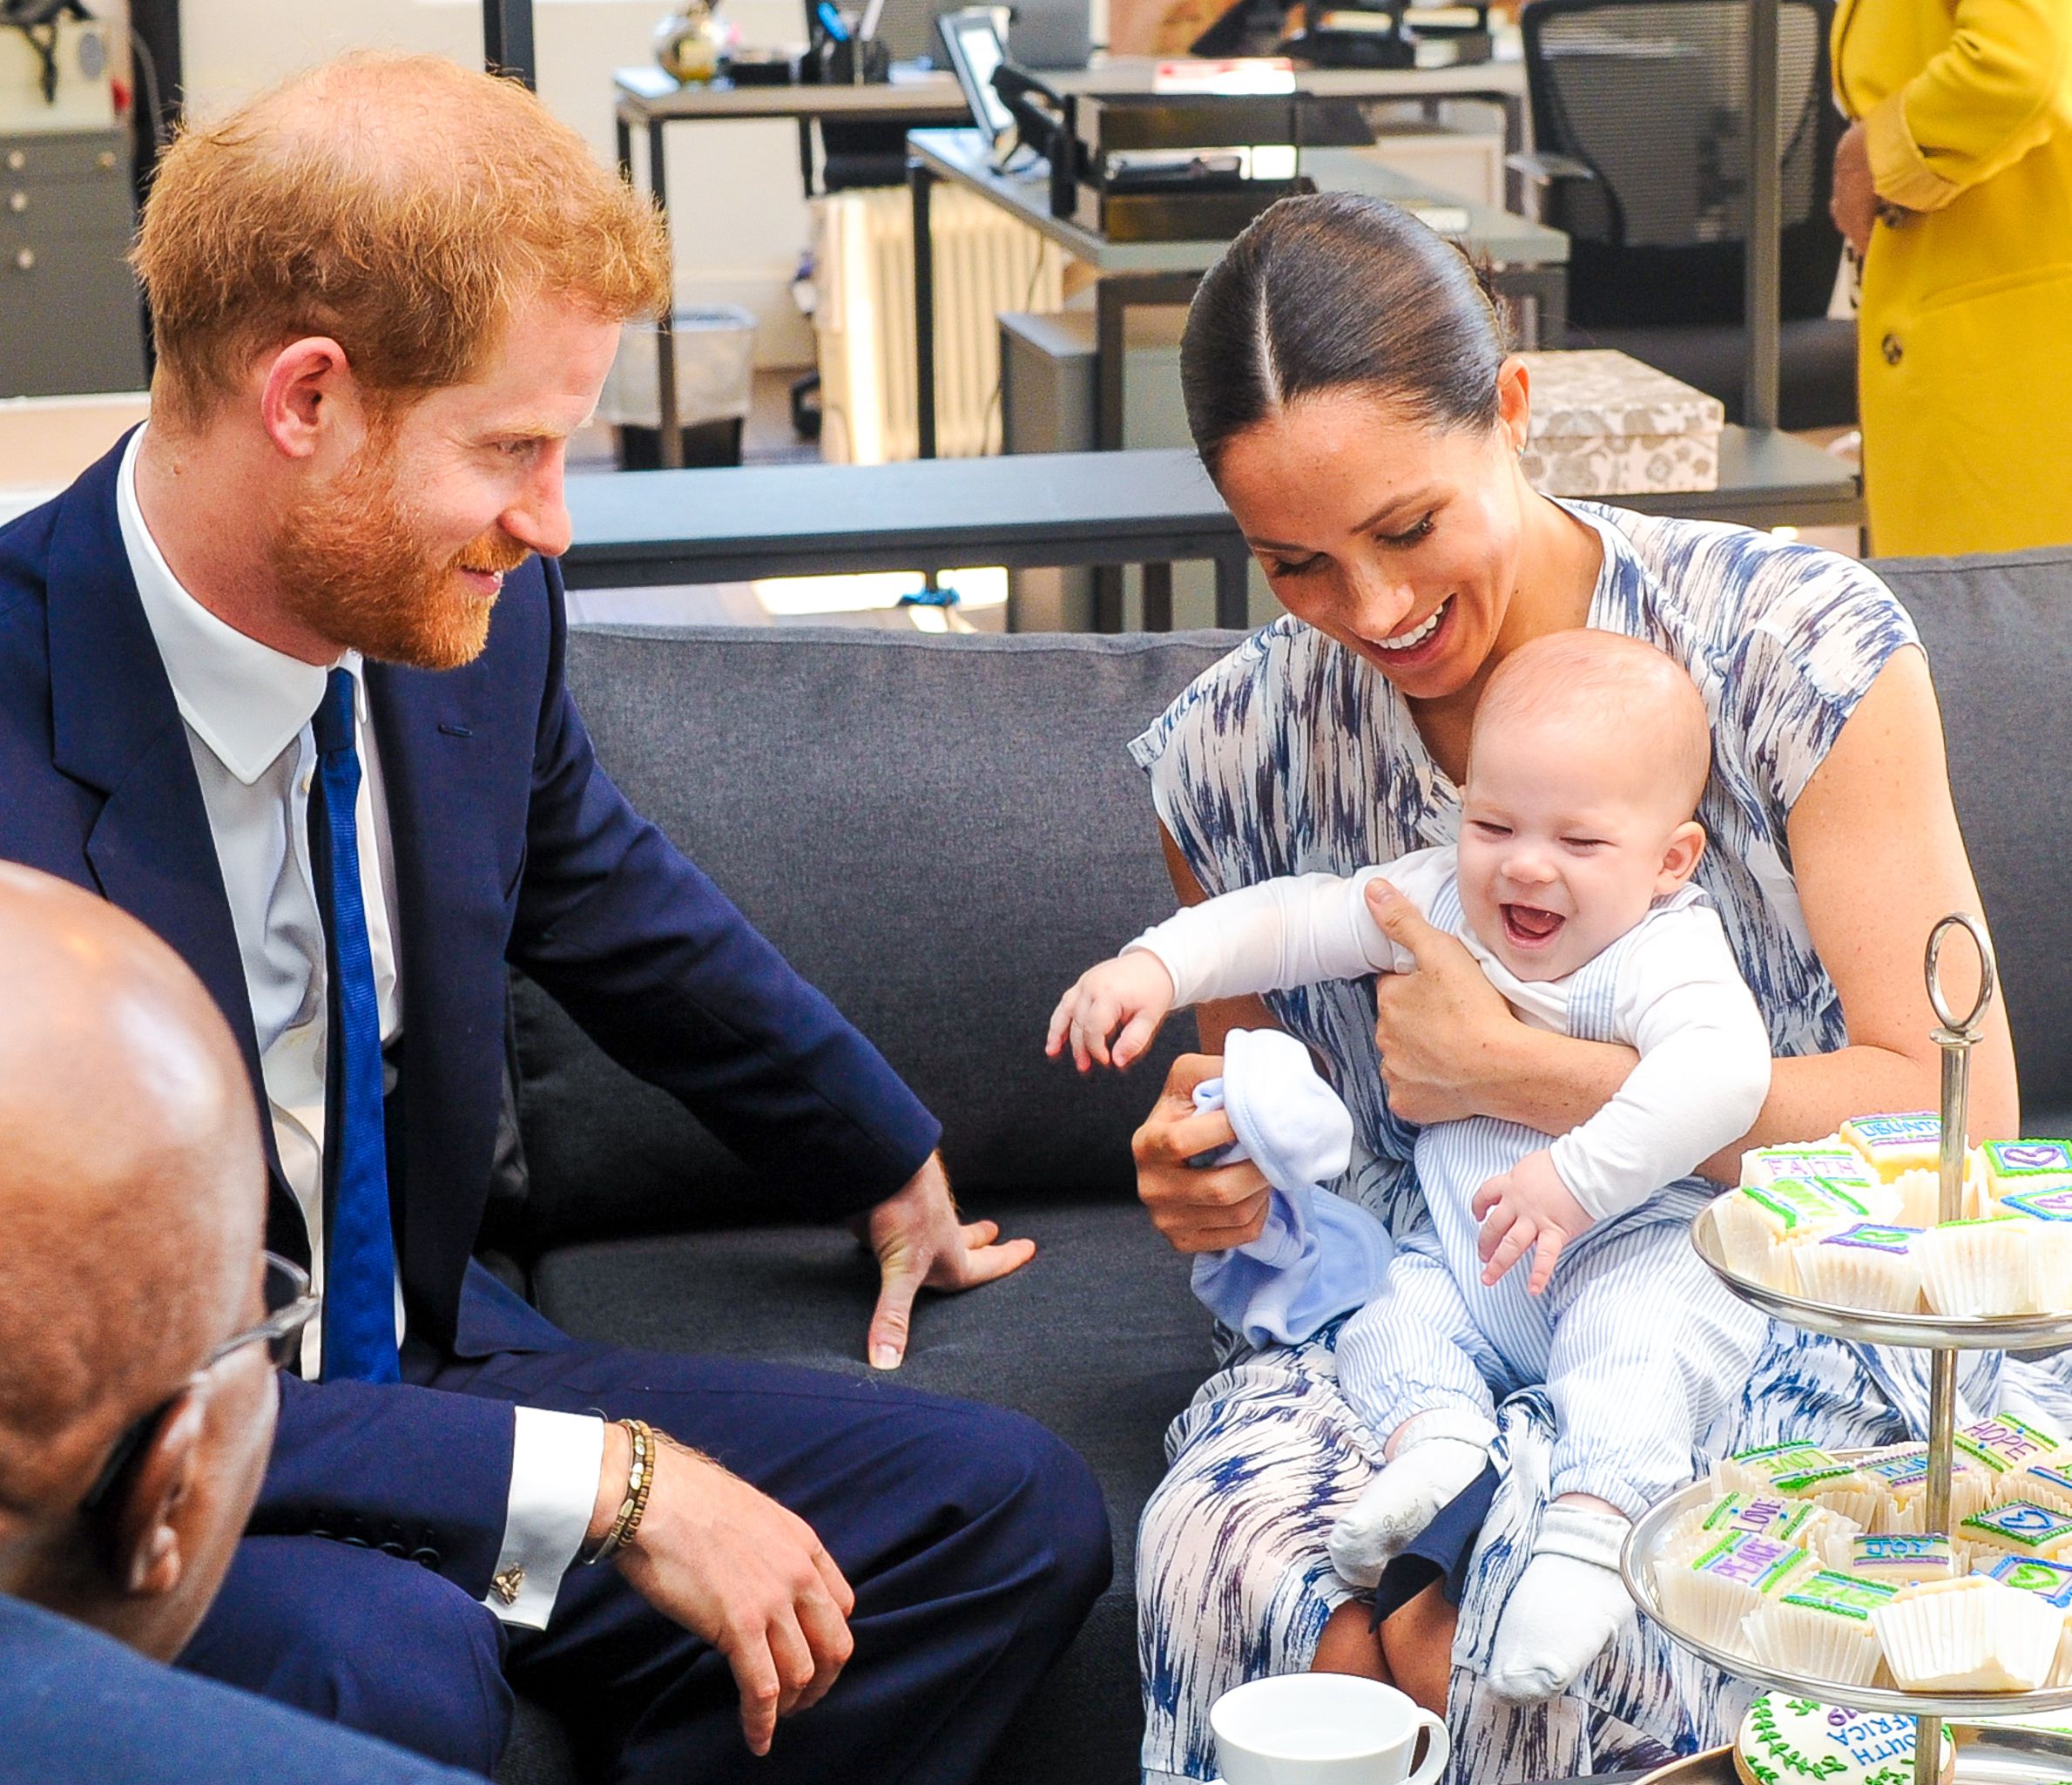 Harry and Meghan with baby Archie